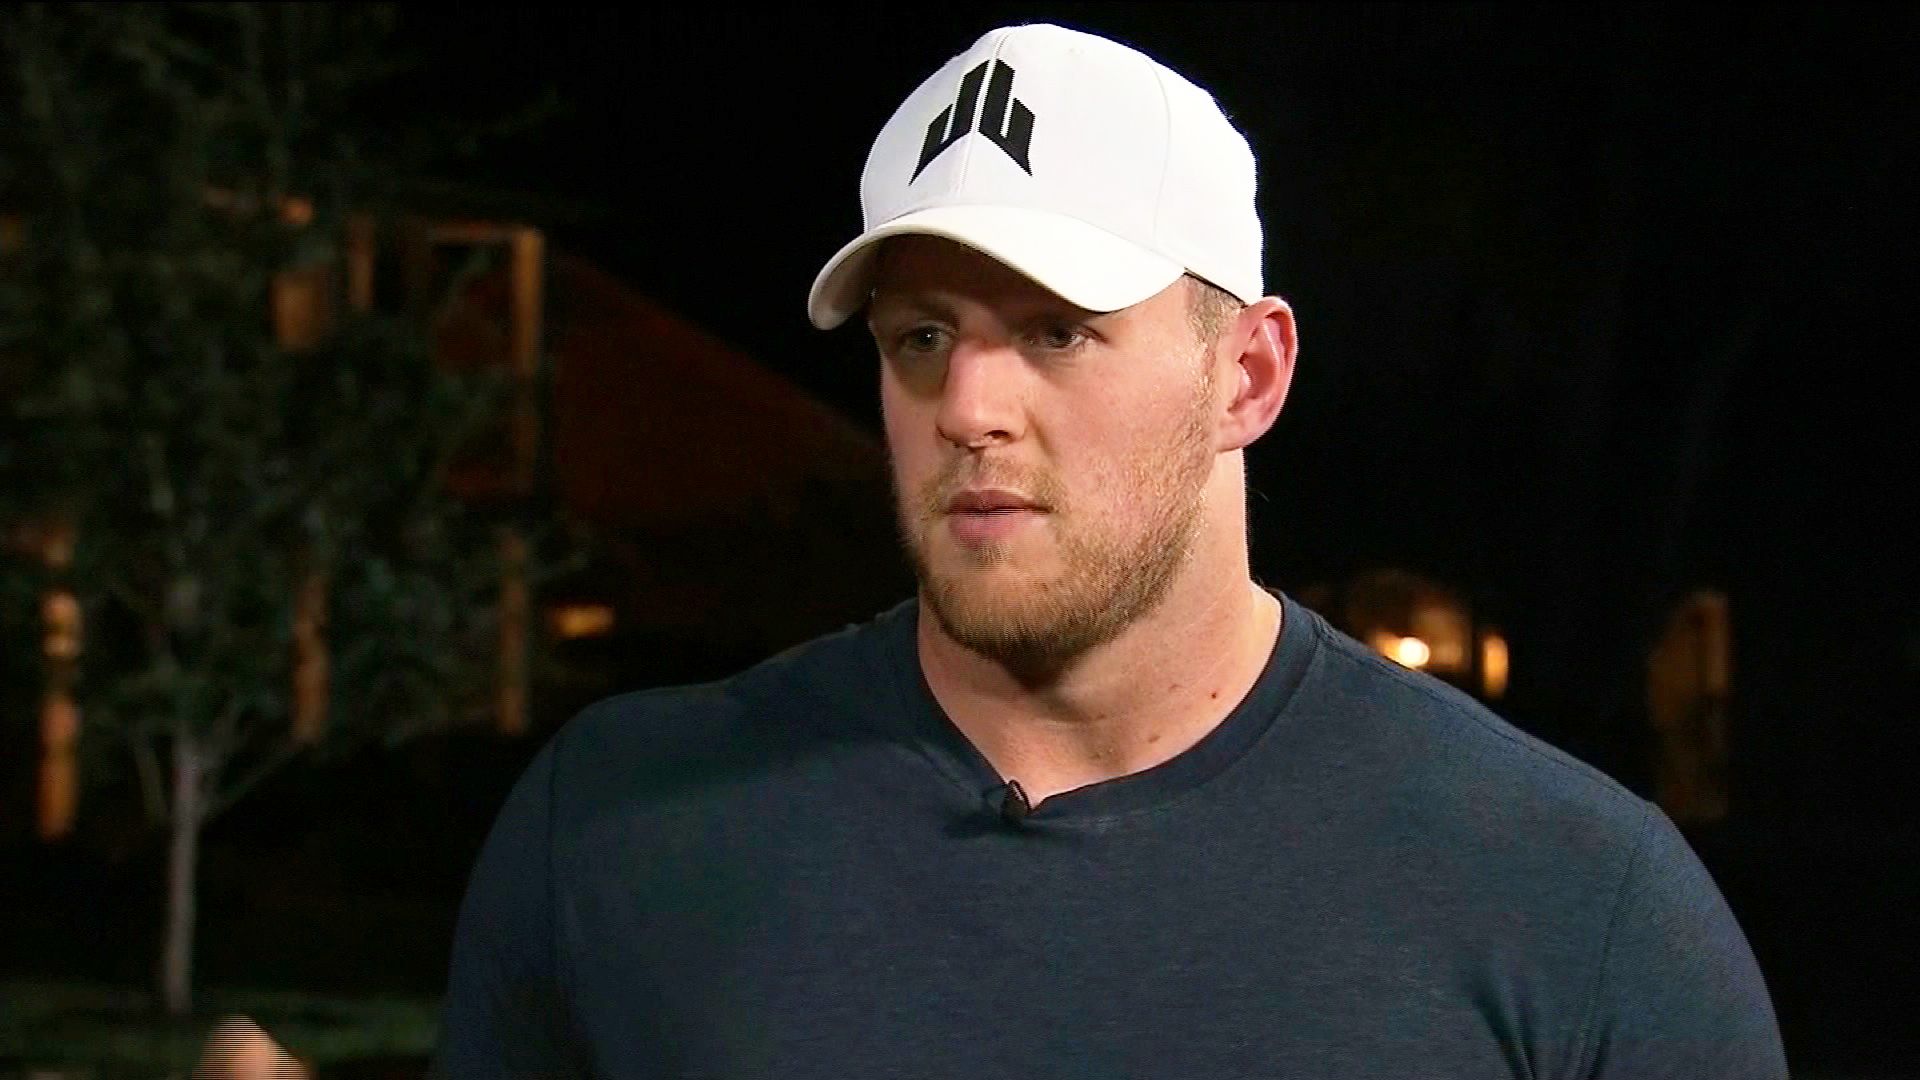 Bleacher Report on X: J.J. Watt offered to help a Texans fan pay for her  grandfather's funeral after she tried selling her J.J. Watt jersey and  shoes Real one 🙏  /